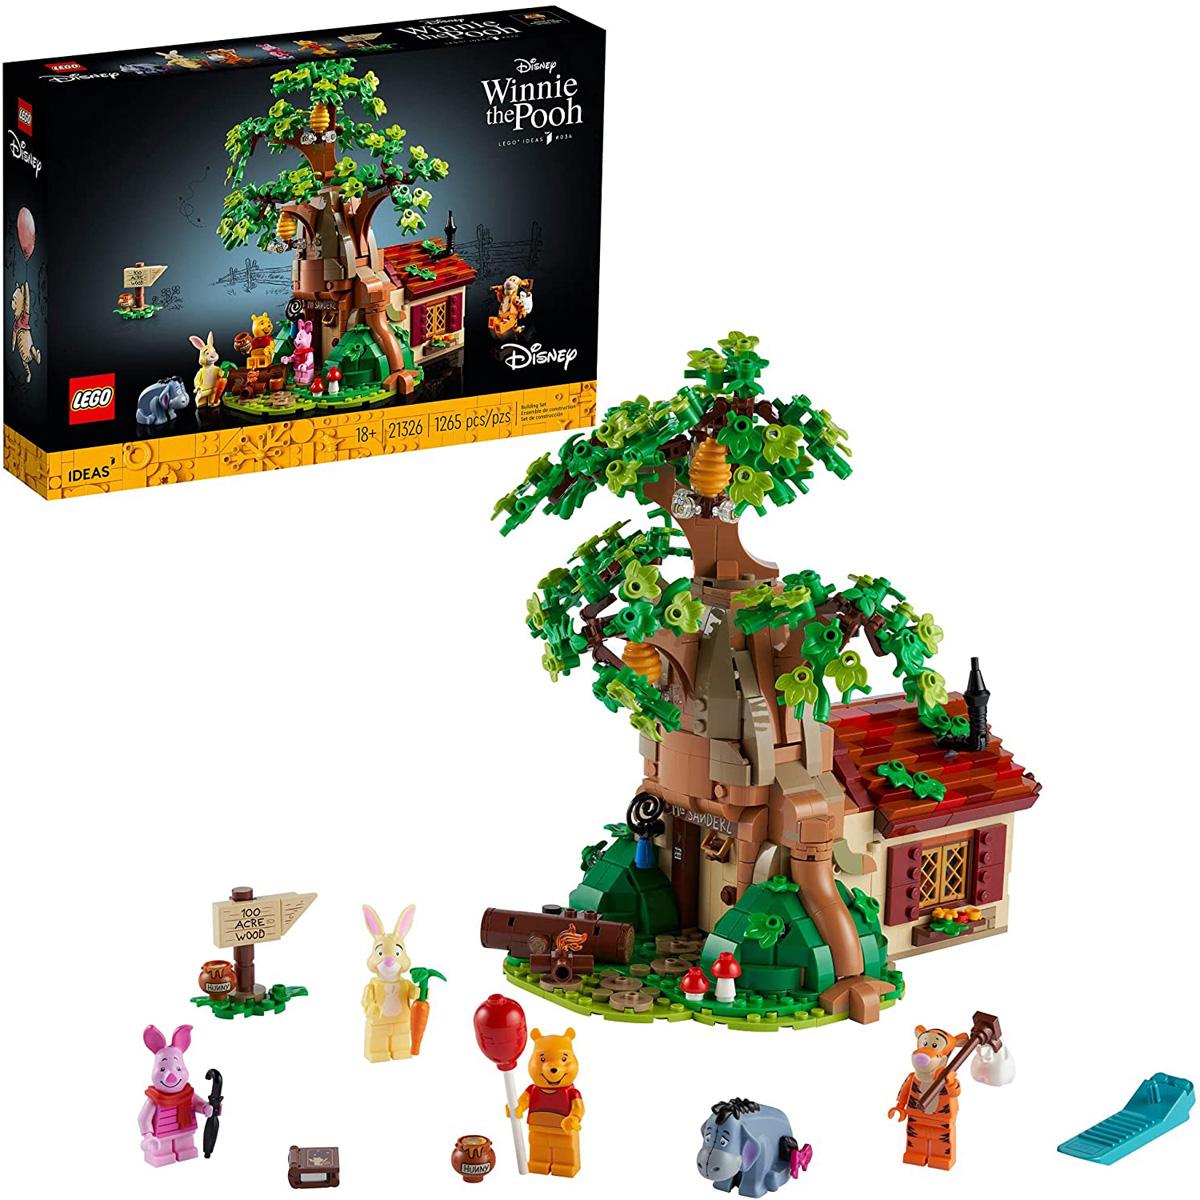 LEGO Ideas Winnie The Pooh Building Set 21326 for $80.49 Shipped